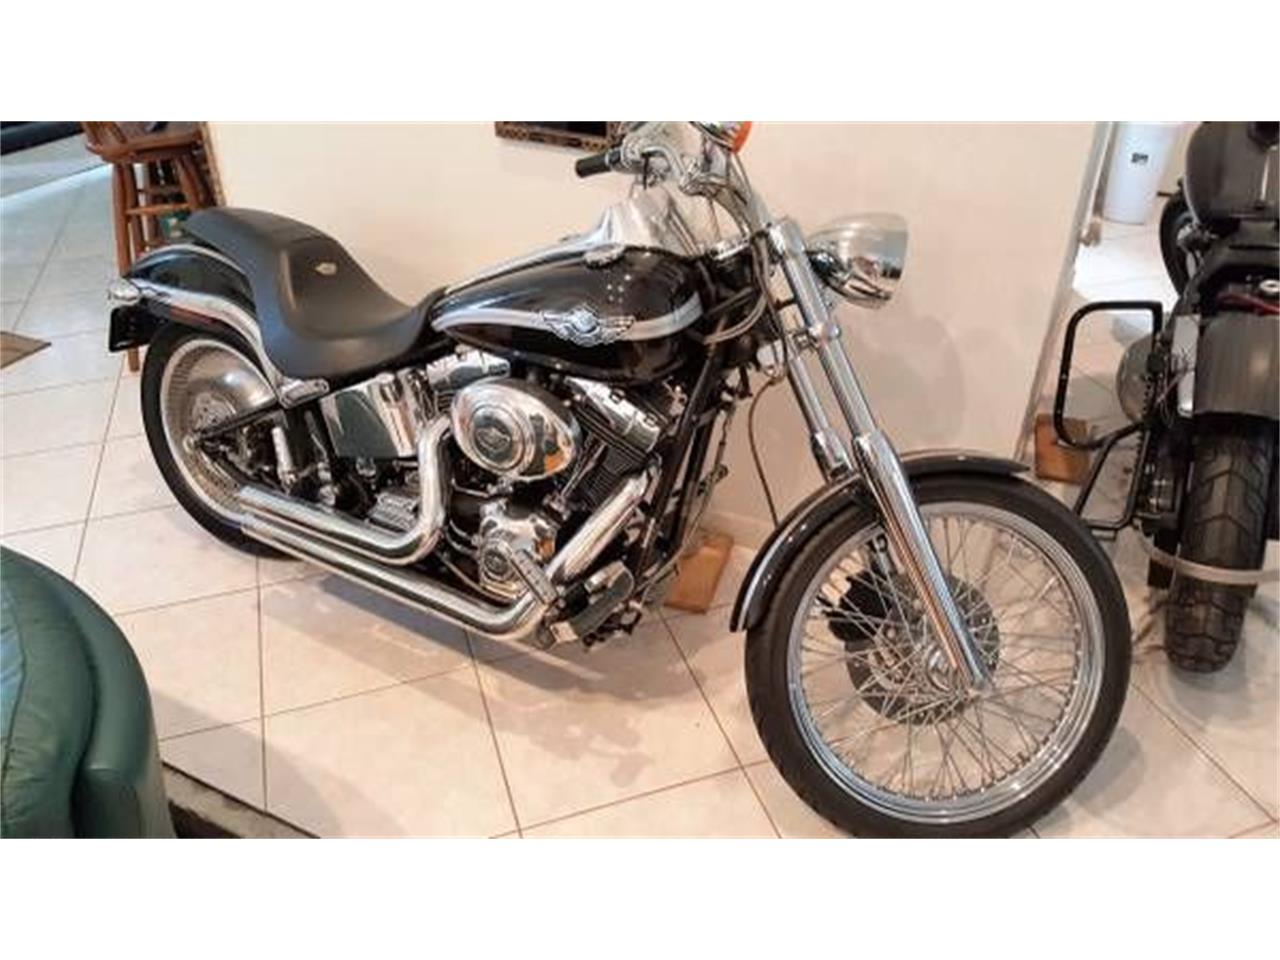 2003 Harley-Davidson Motorcycle for sale in Cadillac, MI